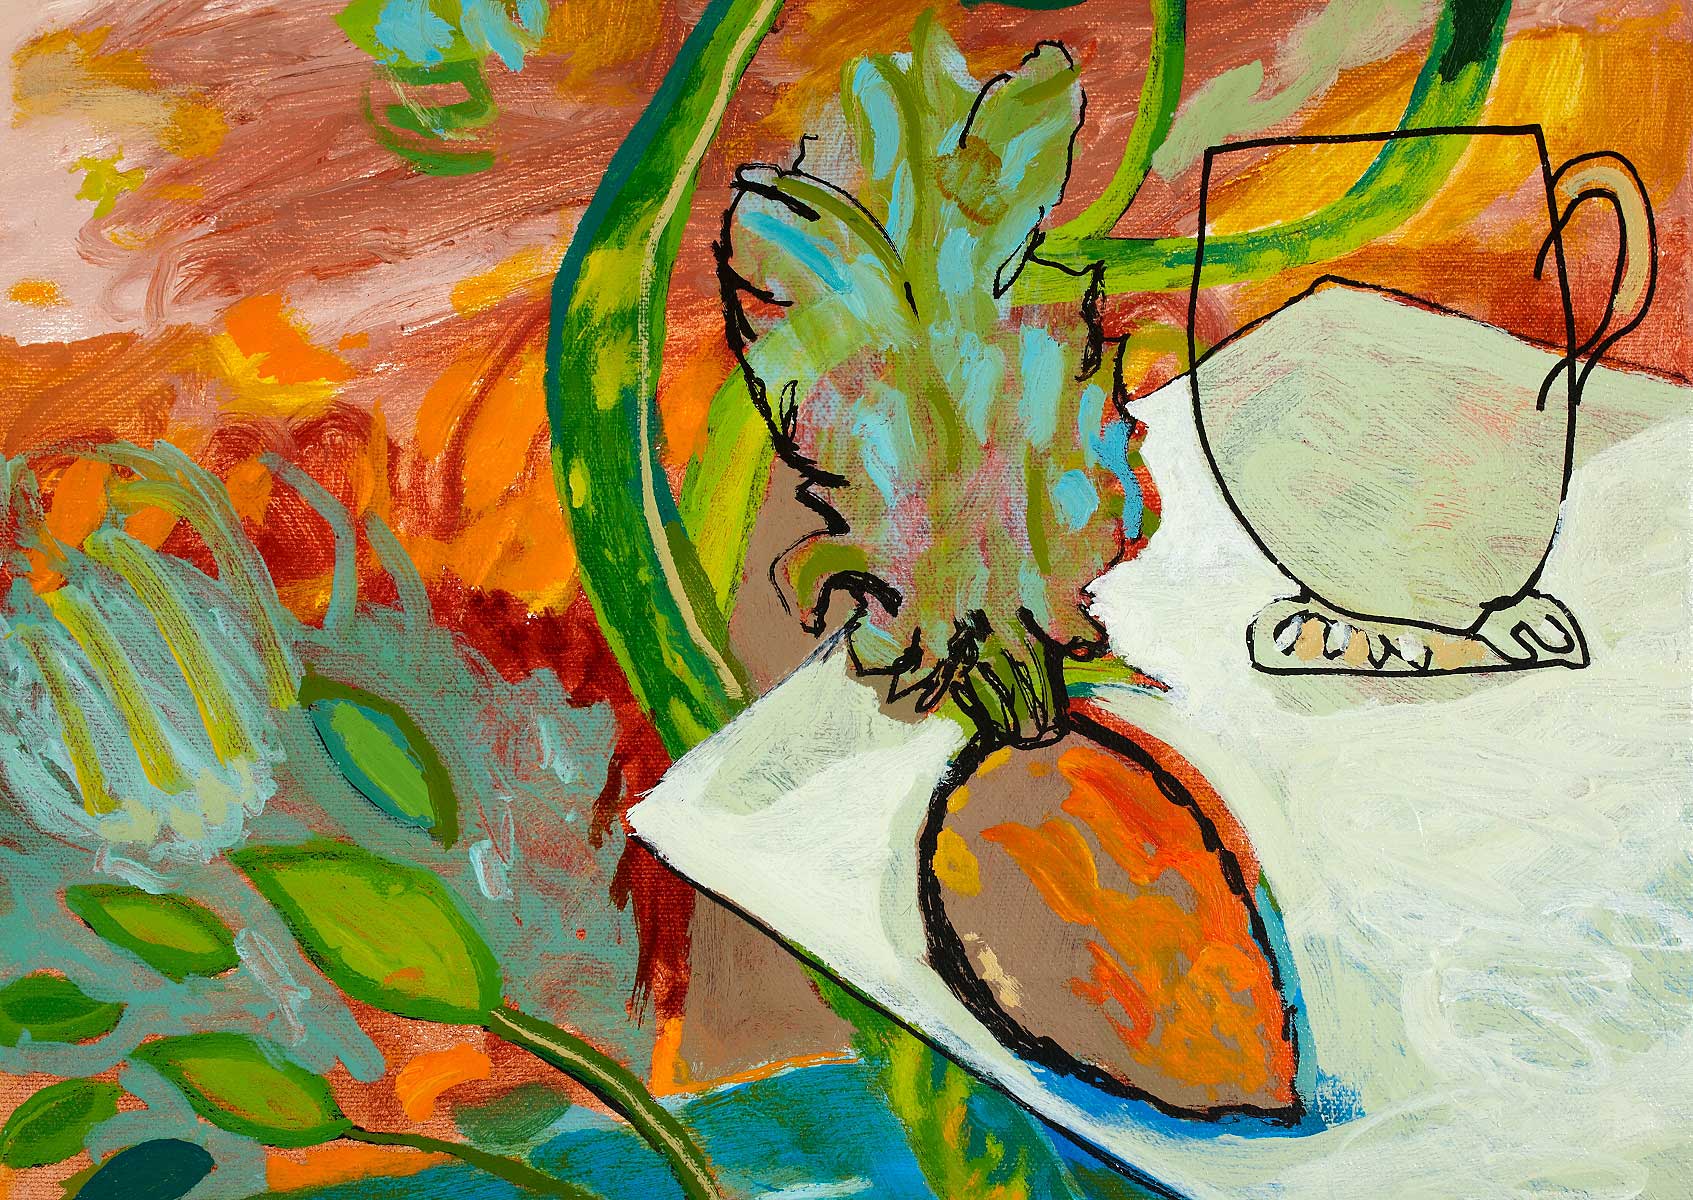 detail of juice squeezing painting